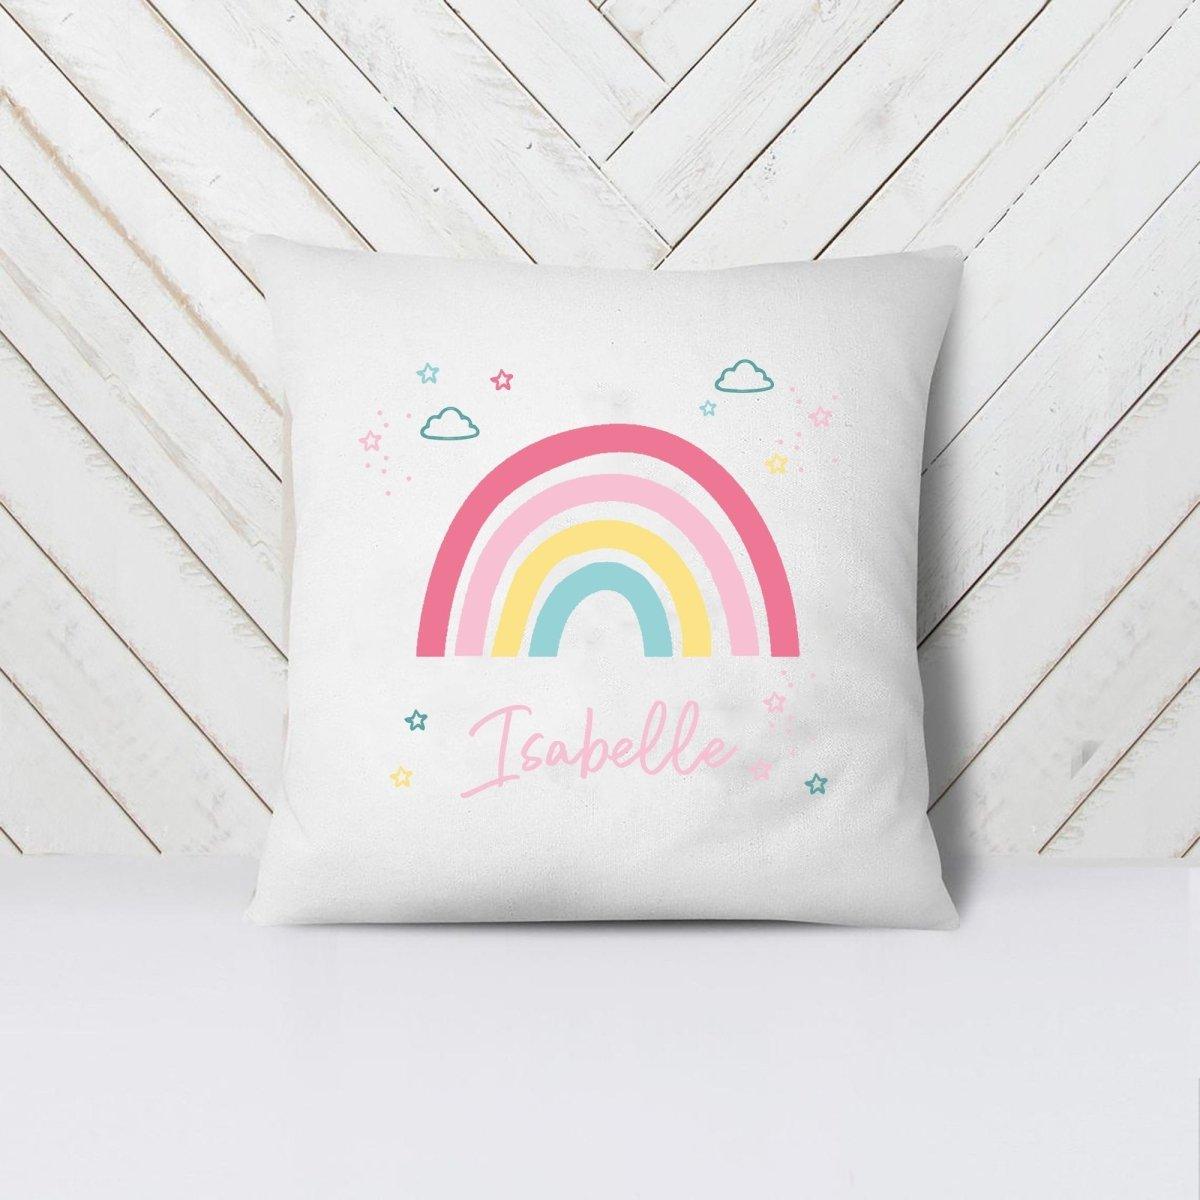 Personalised Rainbow Cushion, Personalised Rainbow Bedroom Decor, Kids Rainbow Decor, Rainbow Custom Room Decor, Rainbow Gifts, Lockdown - Amy Lucy